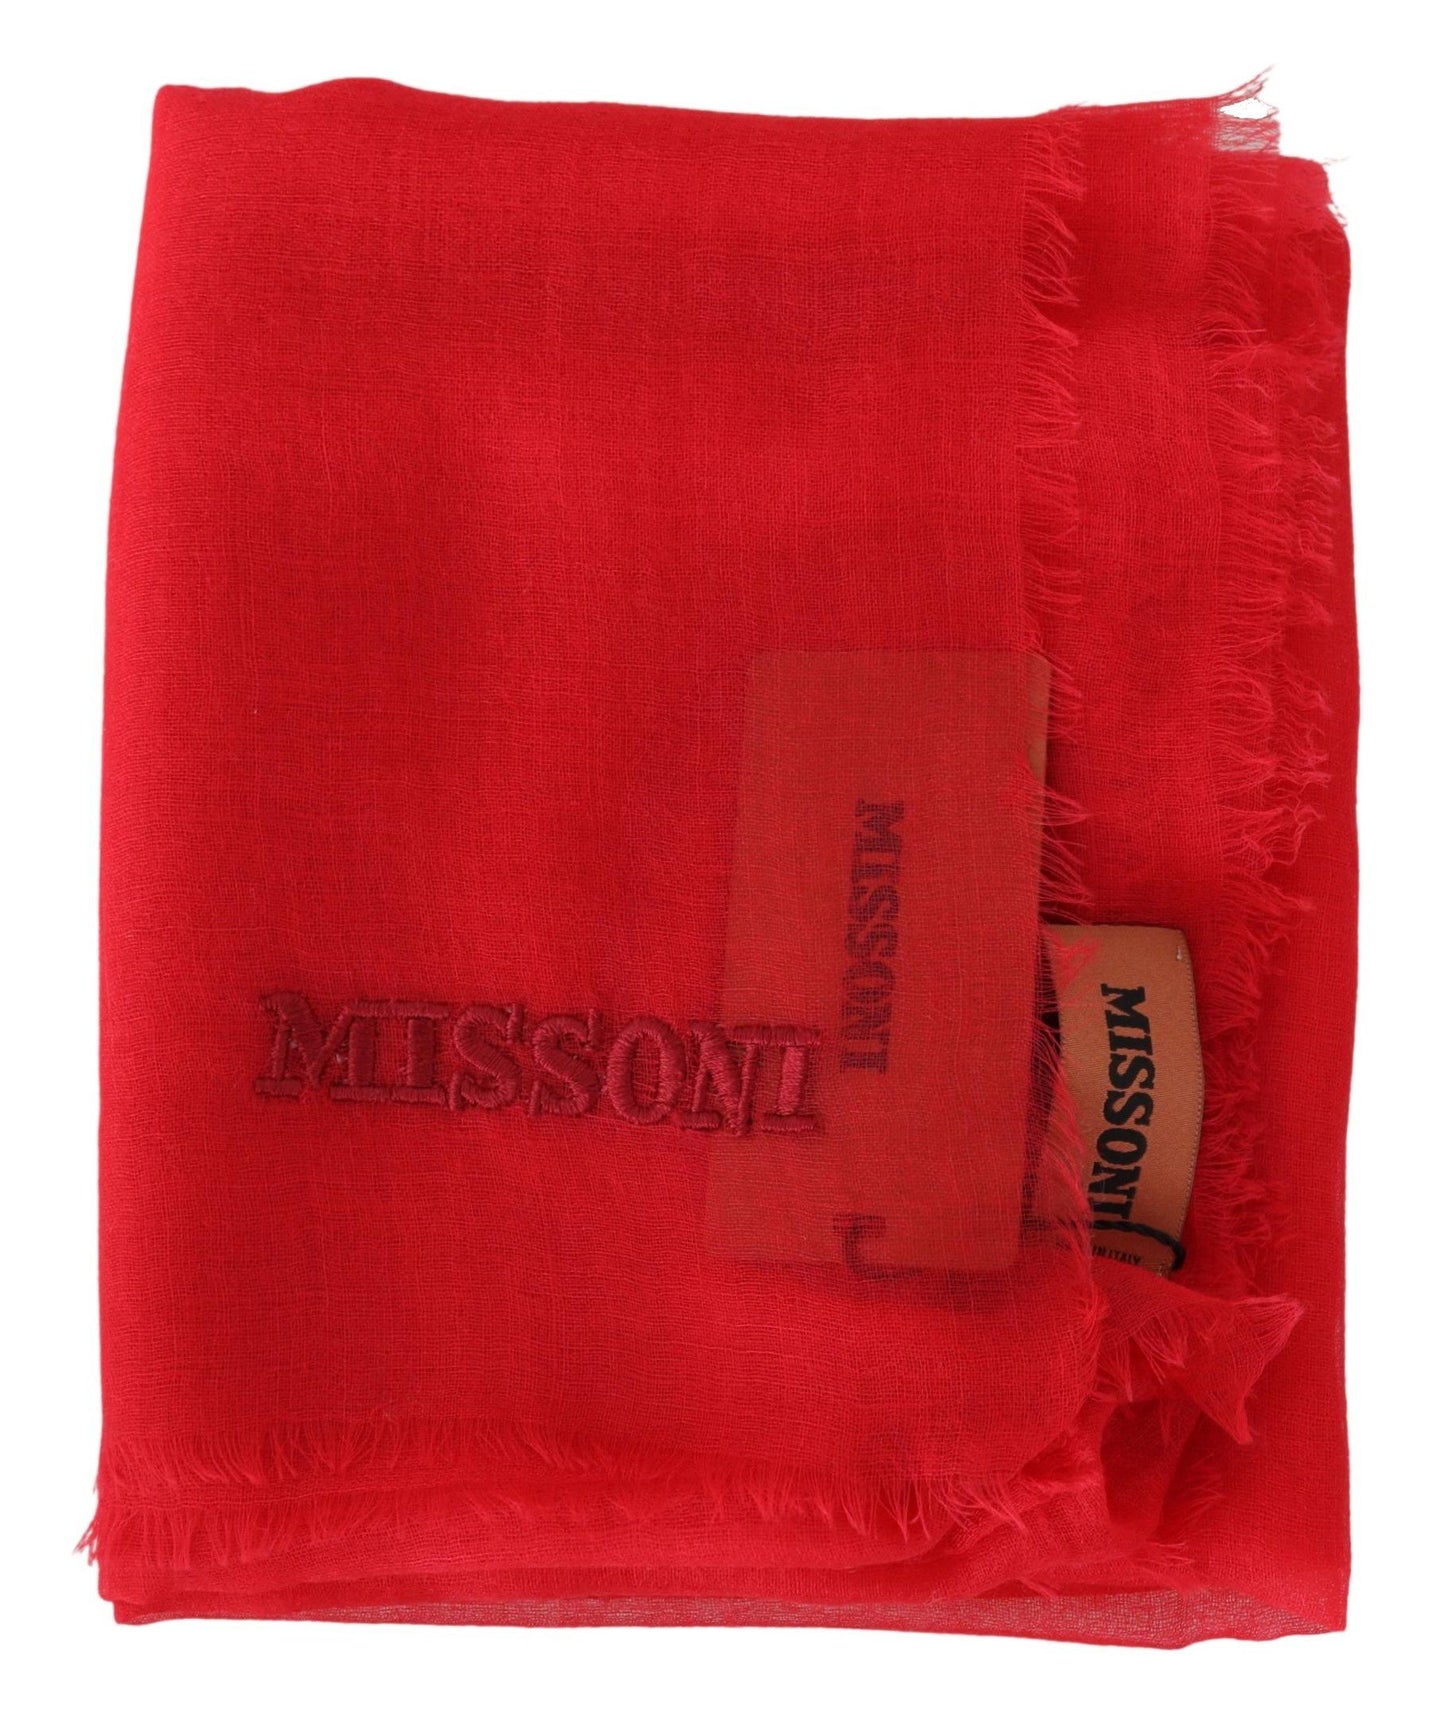 Red 100% Cashmere Unisex Neck Wrap Scarf